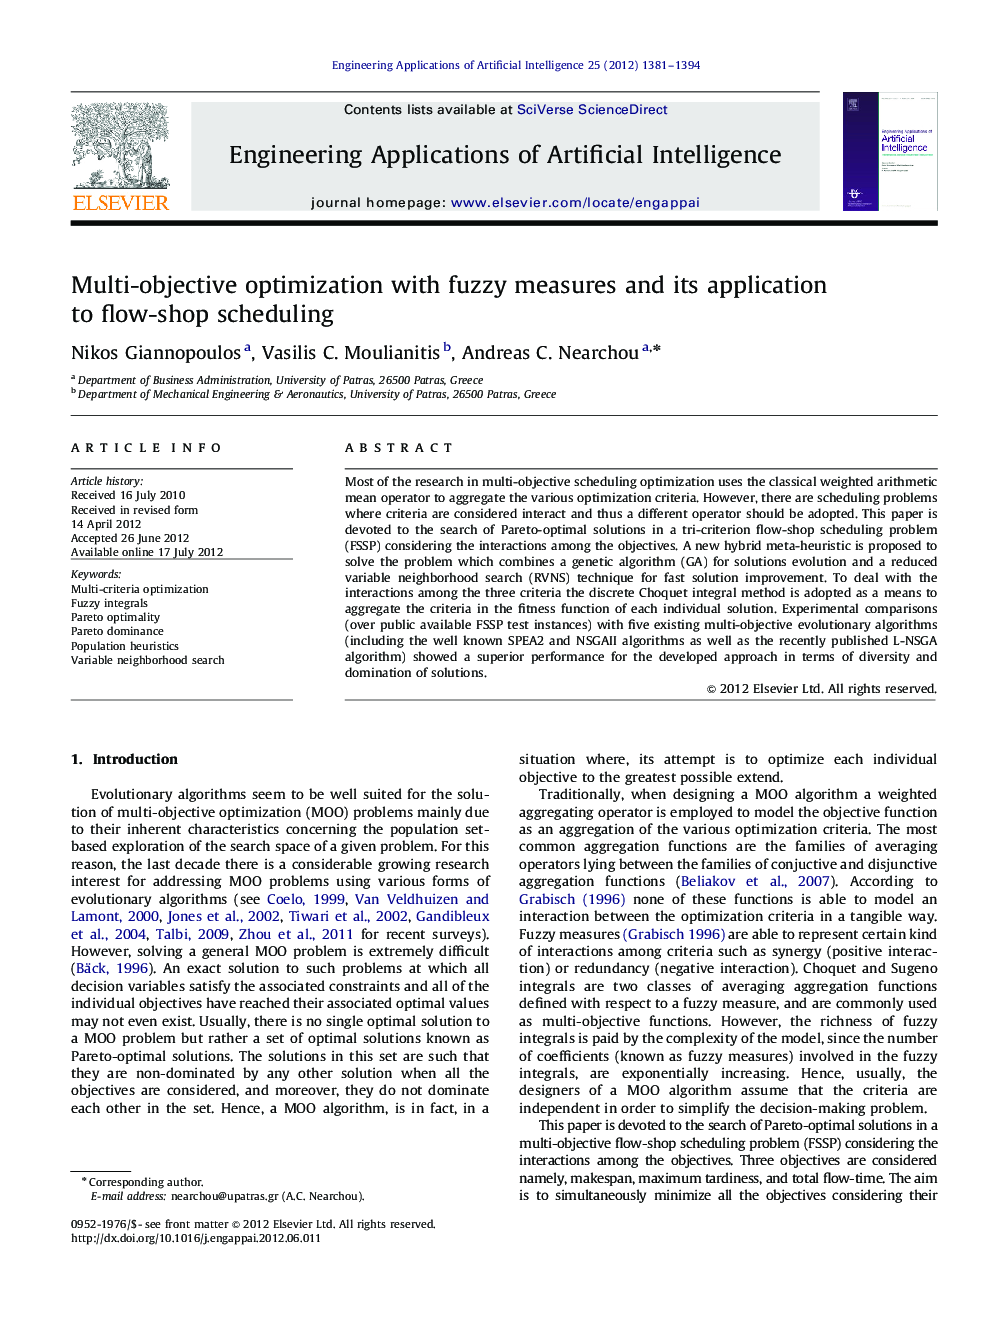 Multi-objective optimization with fuzzy measures and its application to flow-shop scheduling